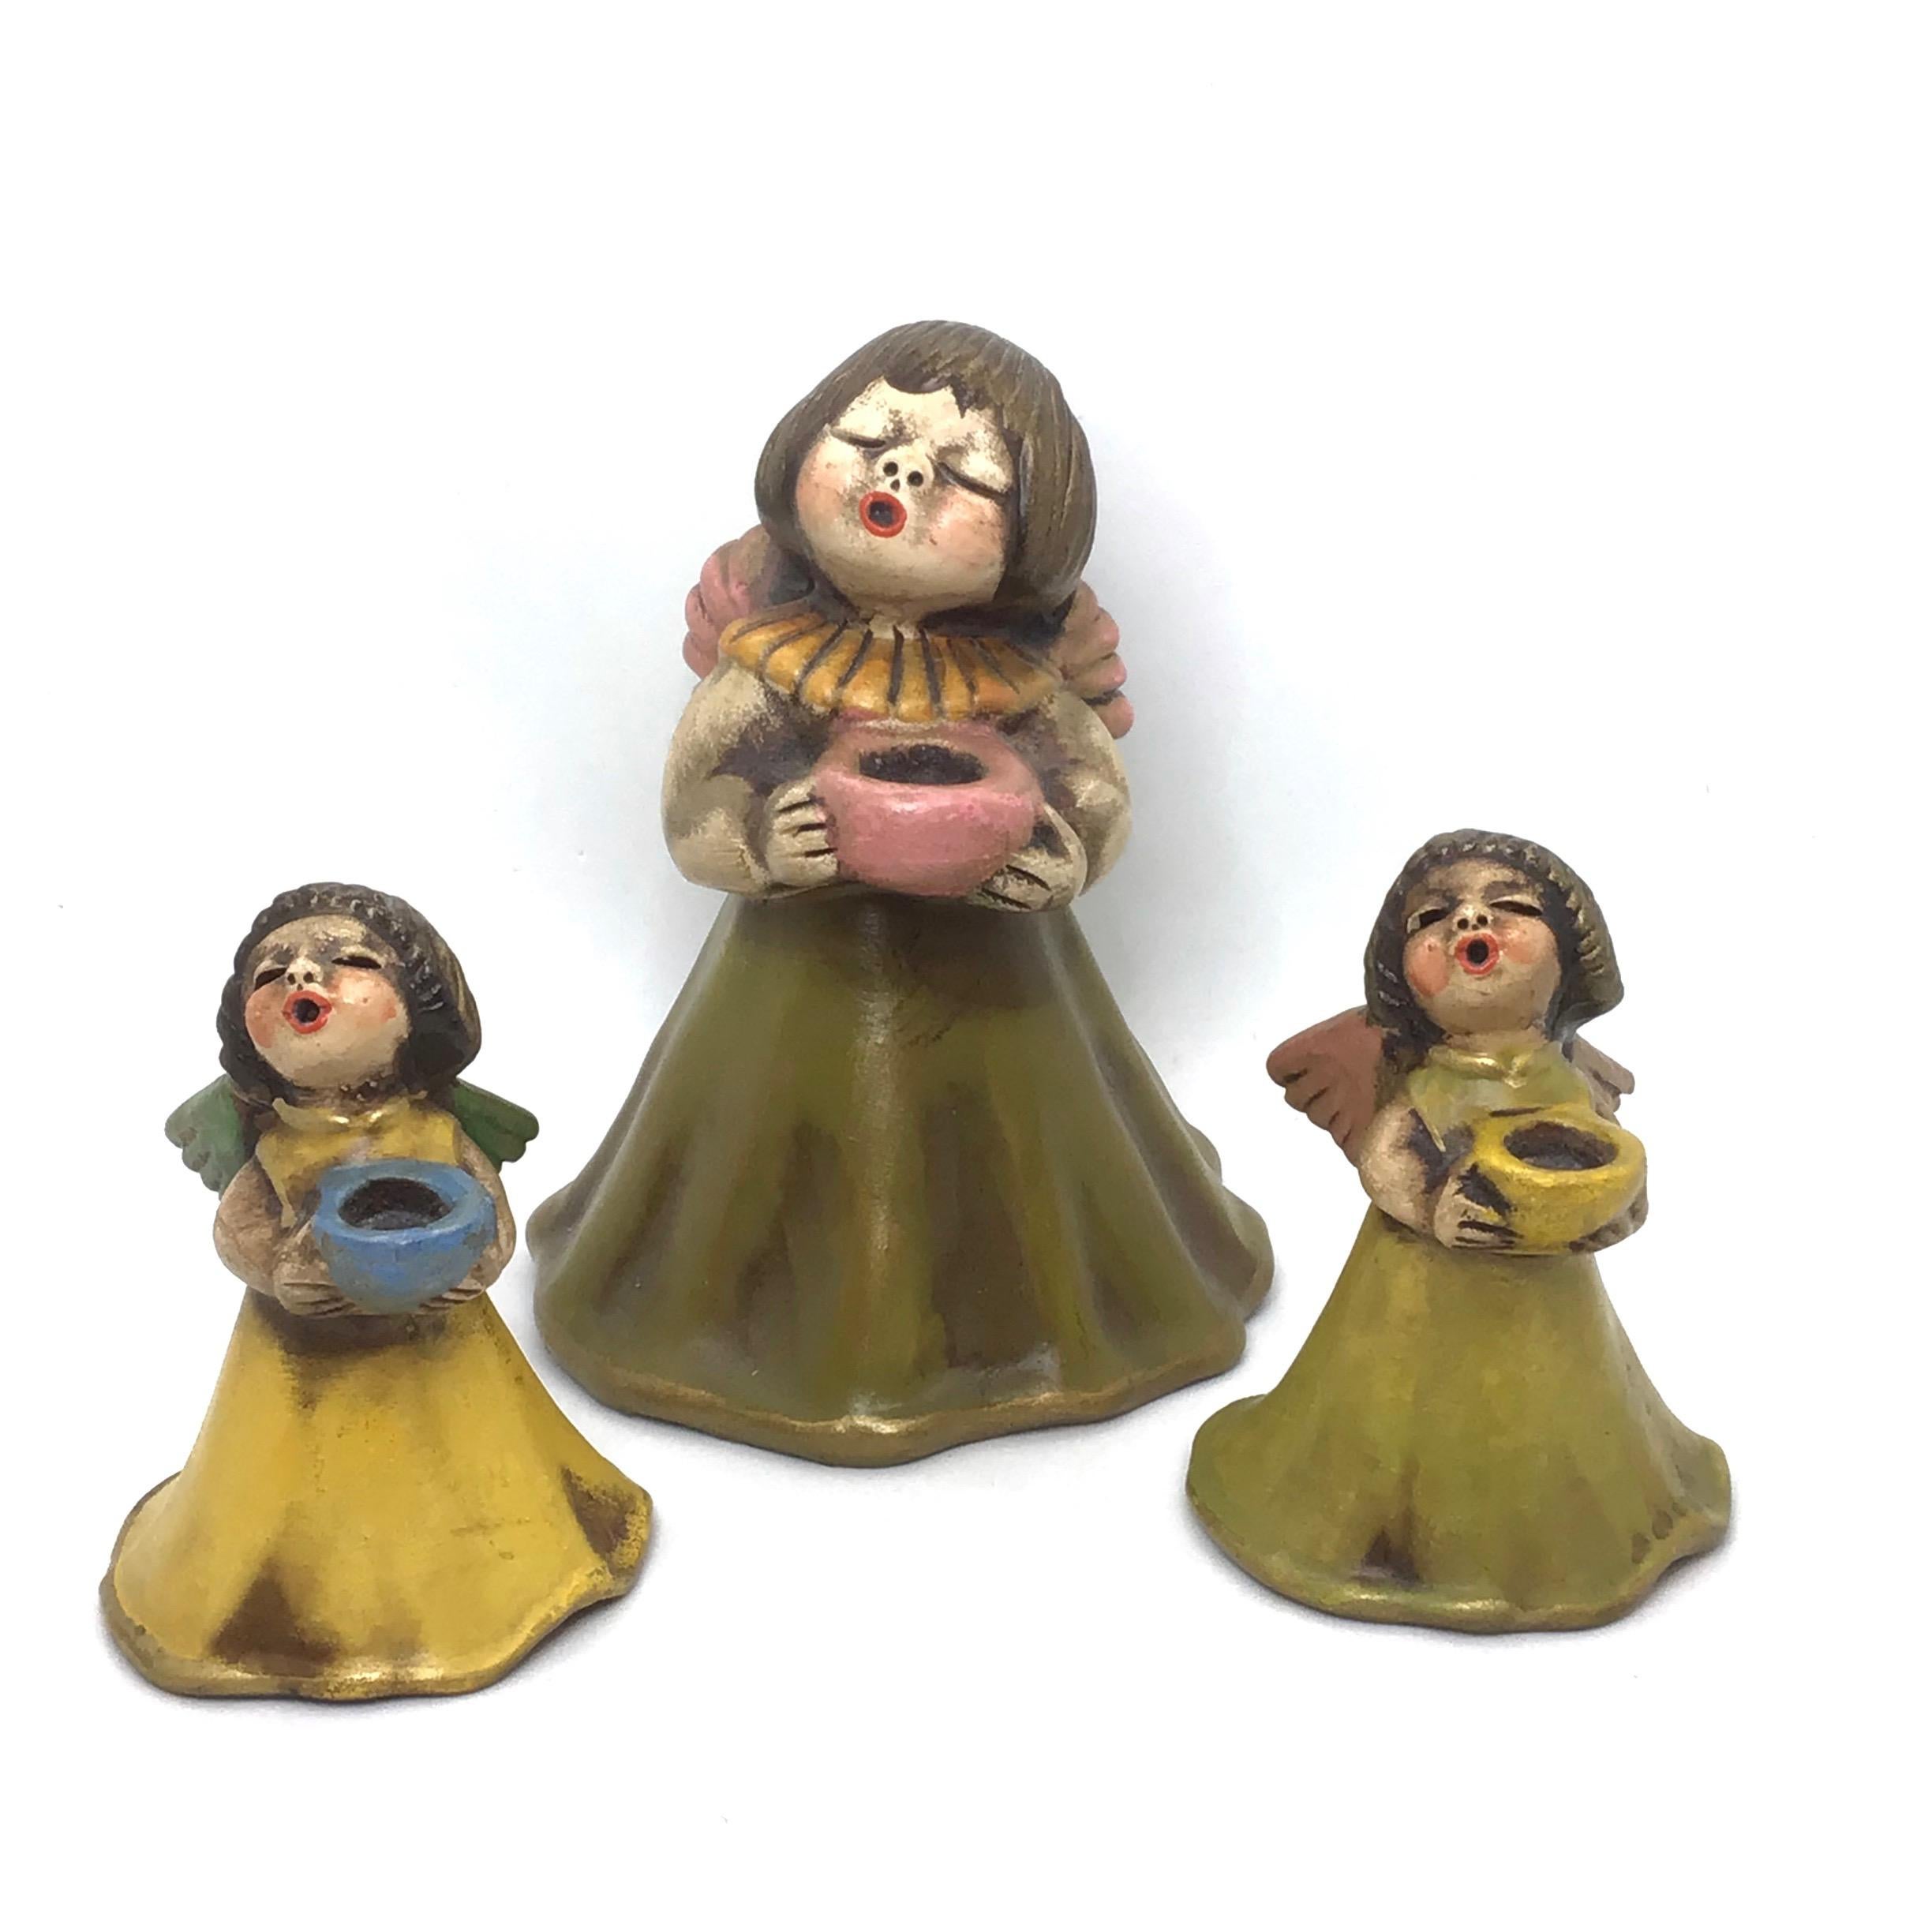 Beautiful set of Cherub Angel candle sticks, found at an estate sale in Italy. Made by Thun a well-known ceramic company in Italy. We believe that these pieces are from the 1960s. A nice addition to any room or for your Christmas decoration.